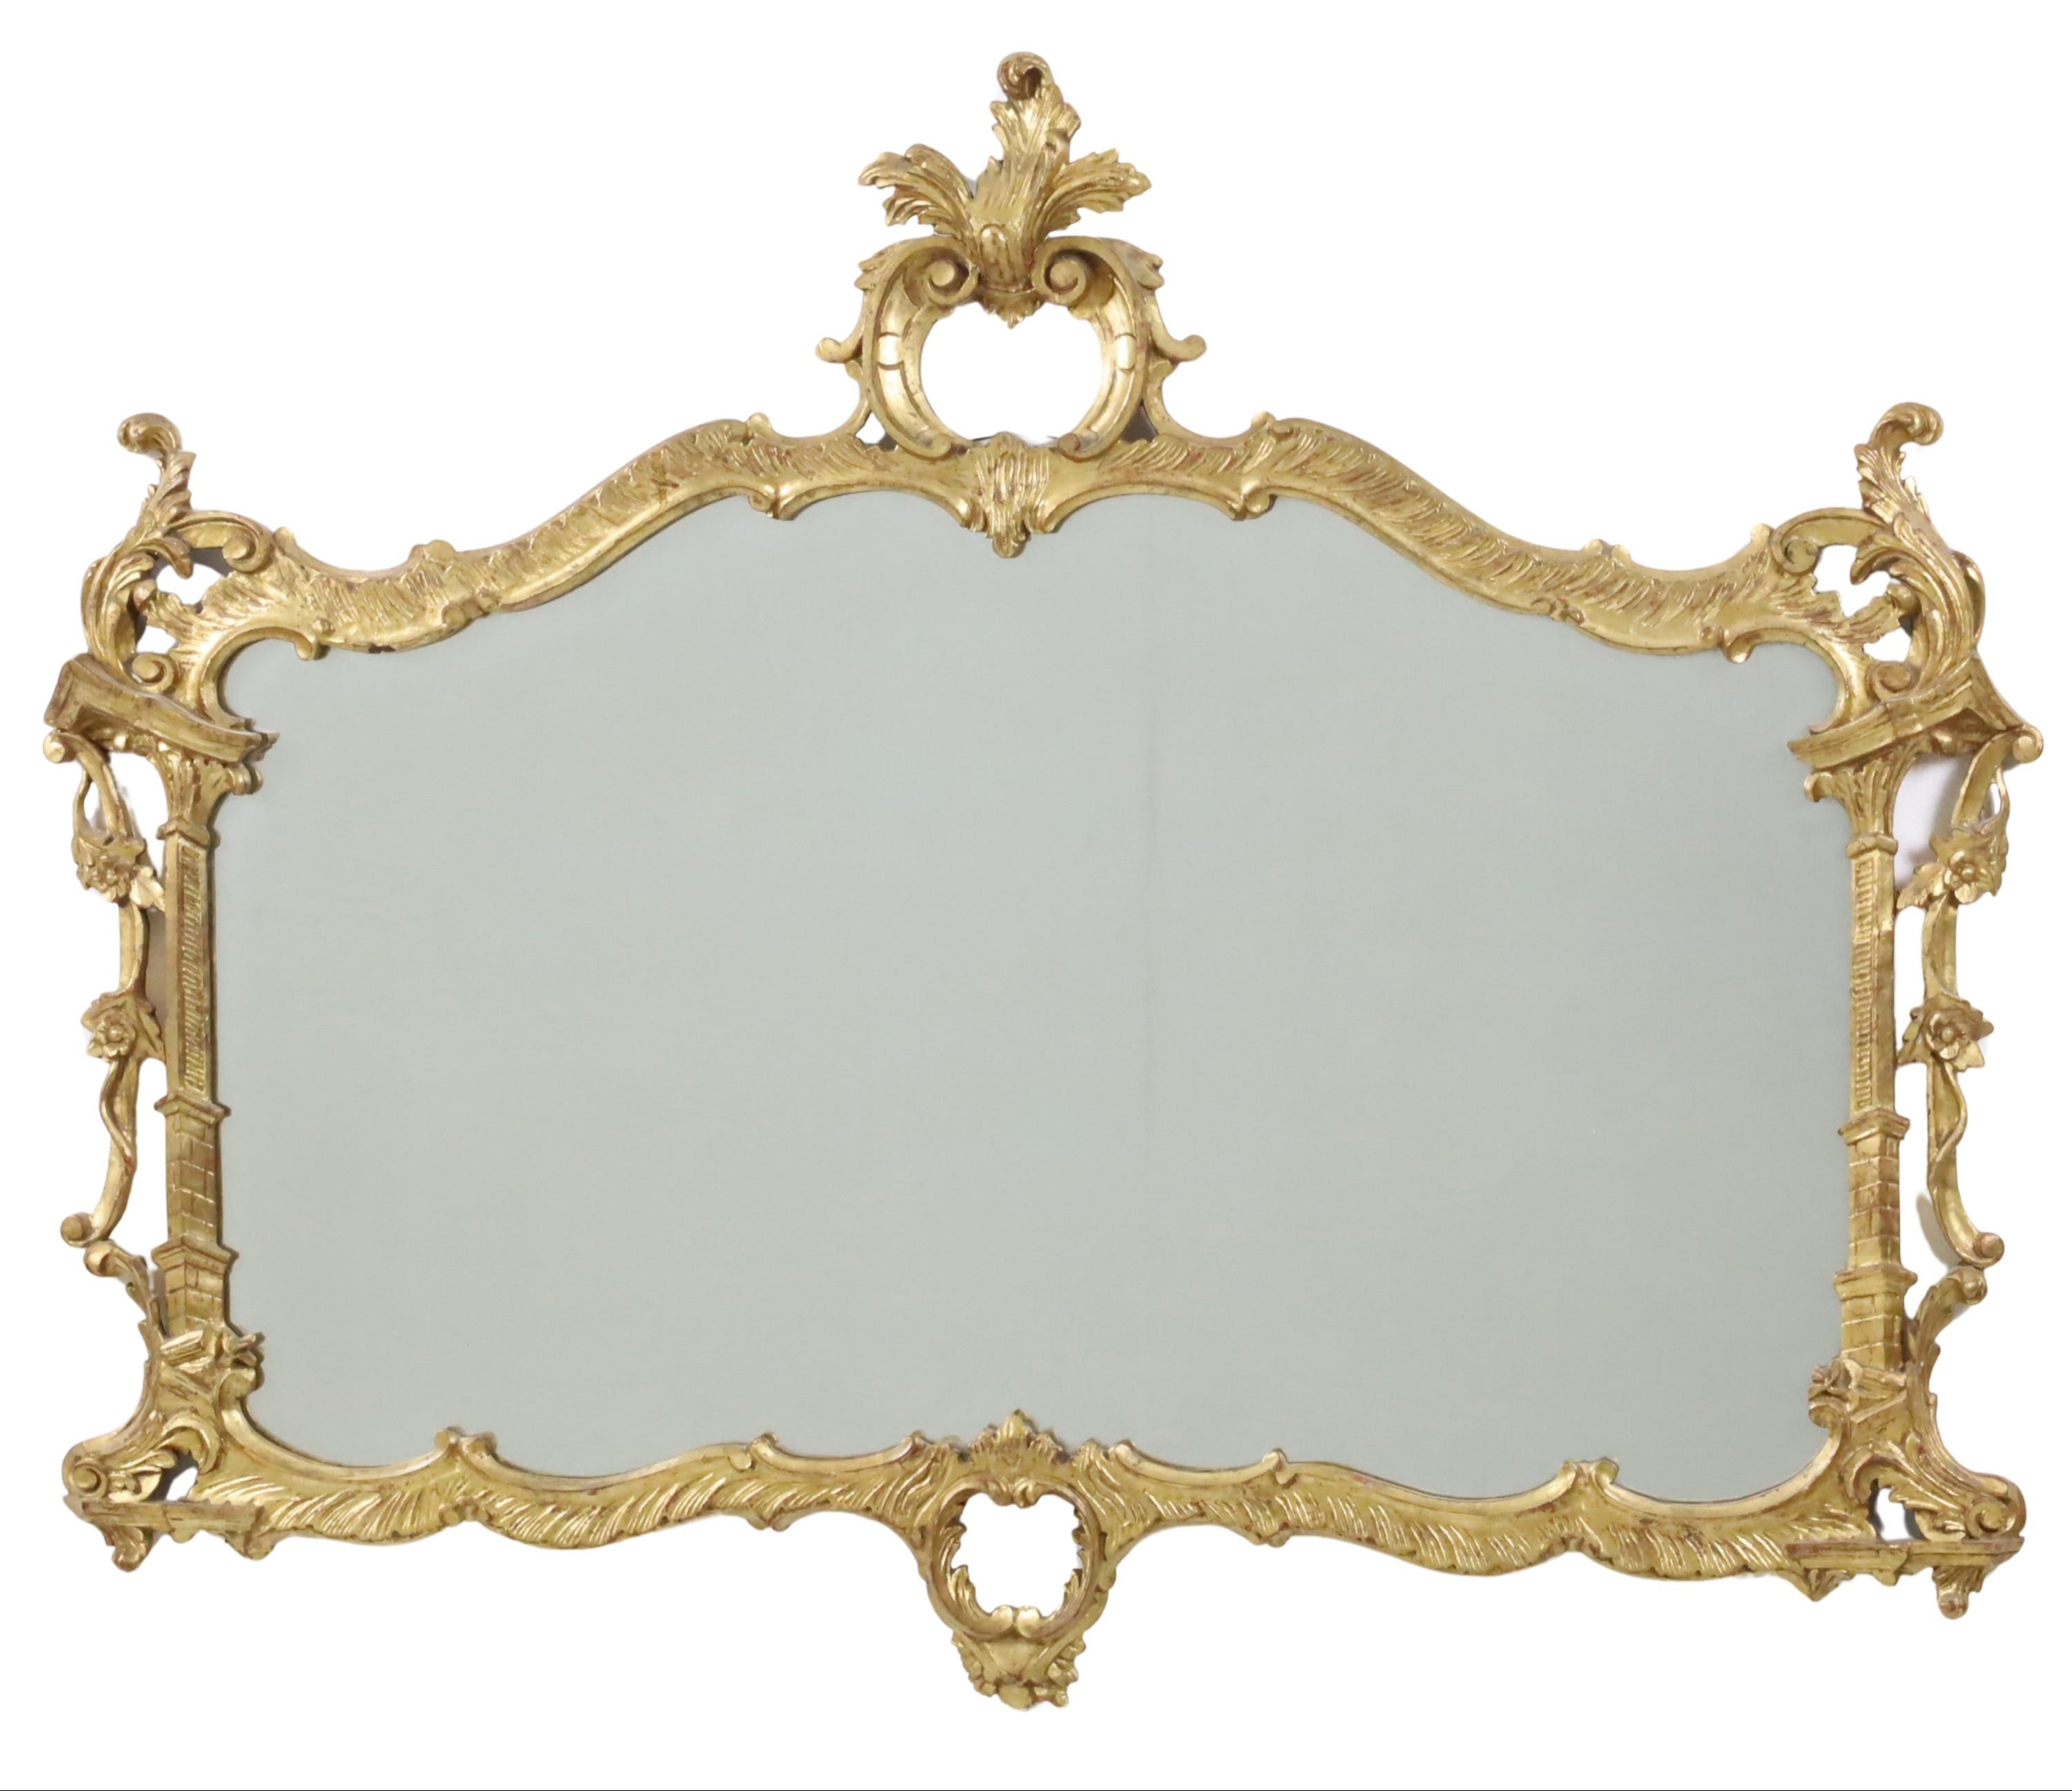 CHINESE CHIPPENDALE STYLE MIRROR 3b3af1